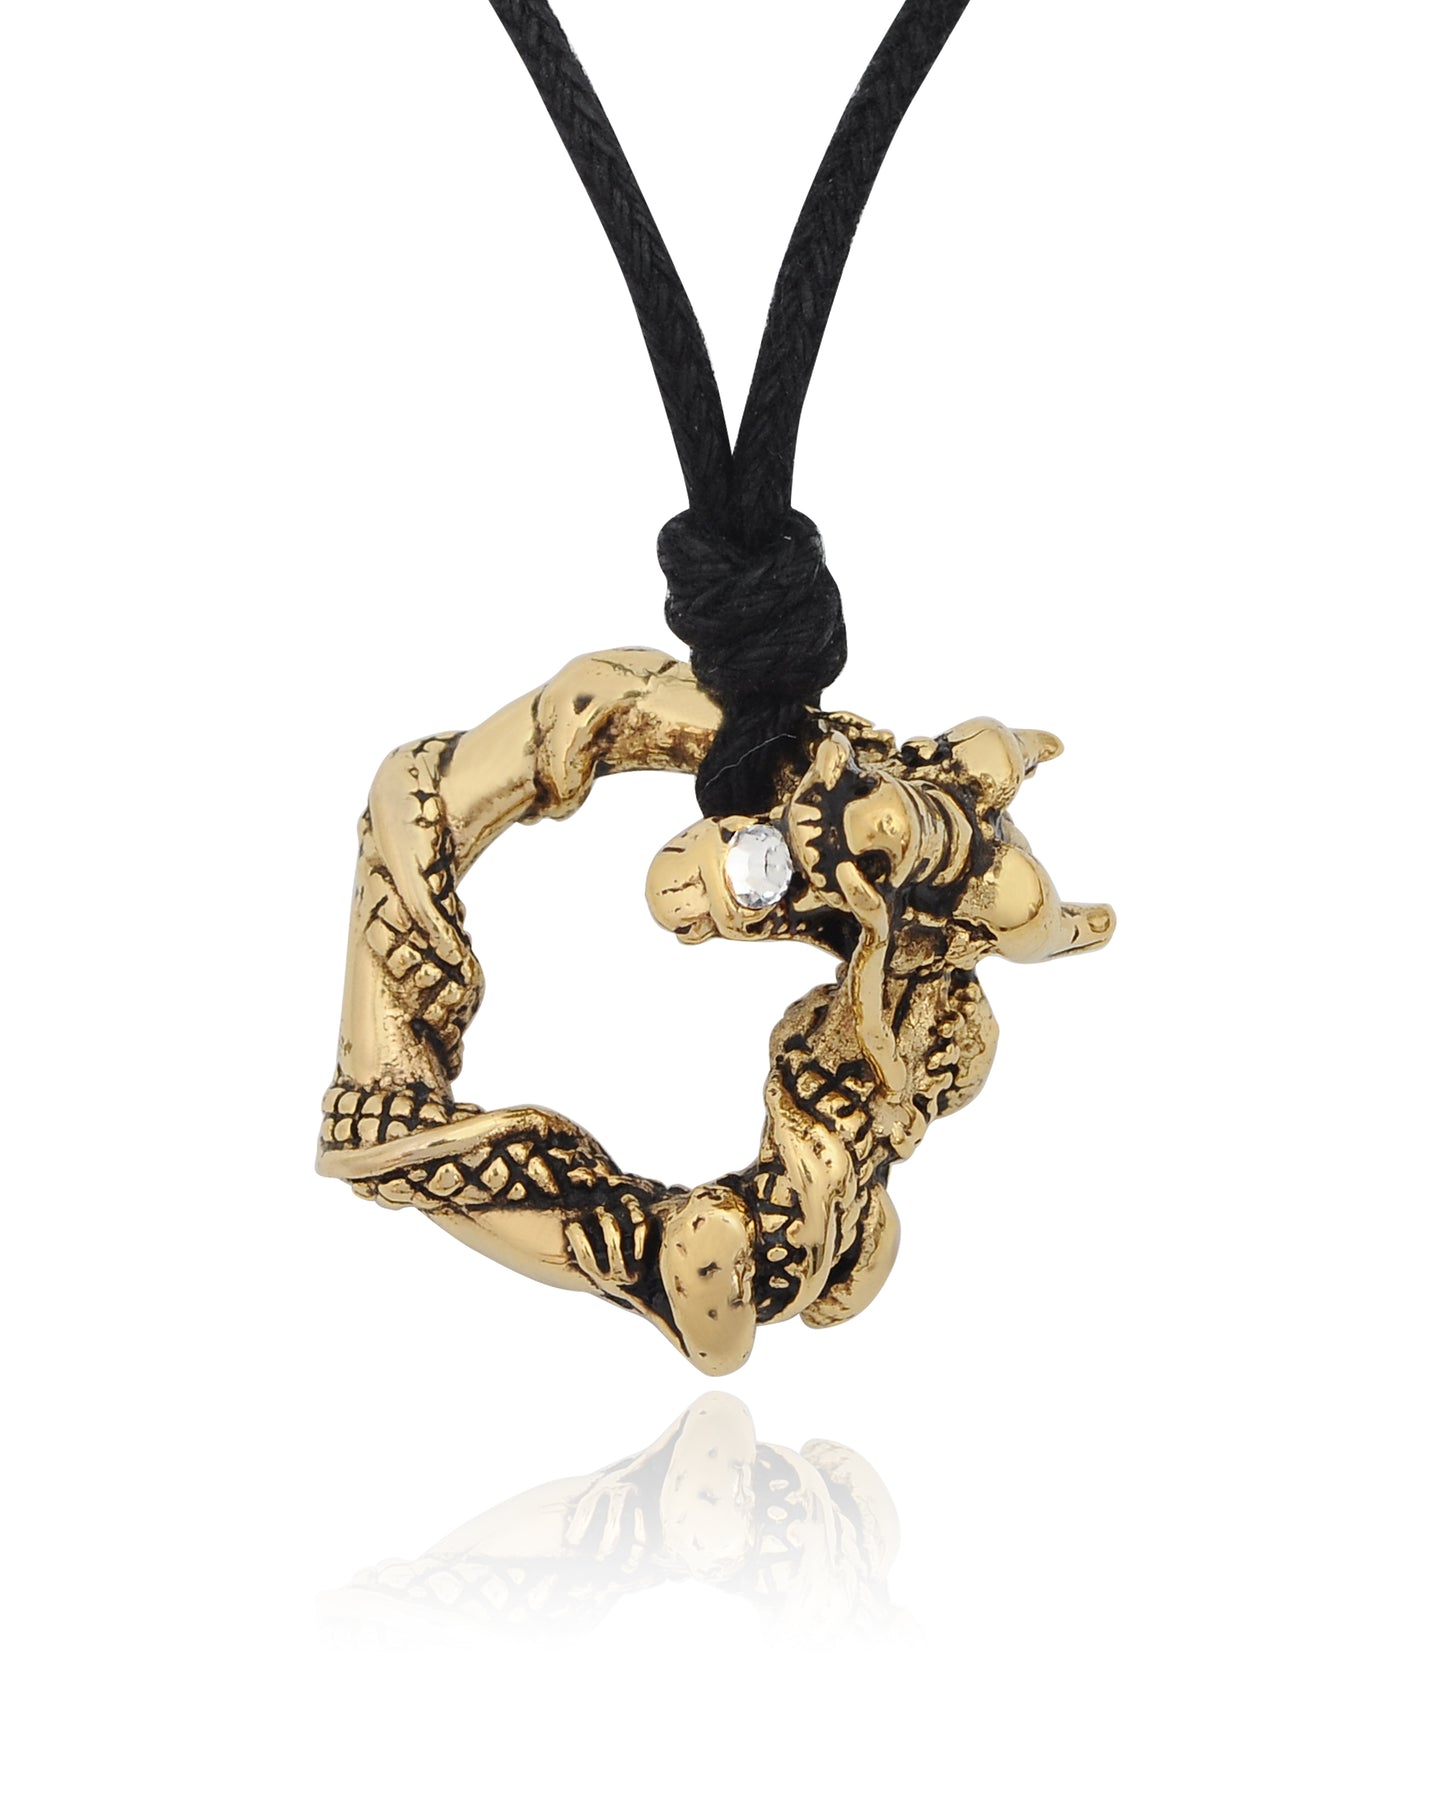 Ouroboros Dragon Handmade Brass Necklace Pendant Jewelry With Cotton Cord